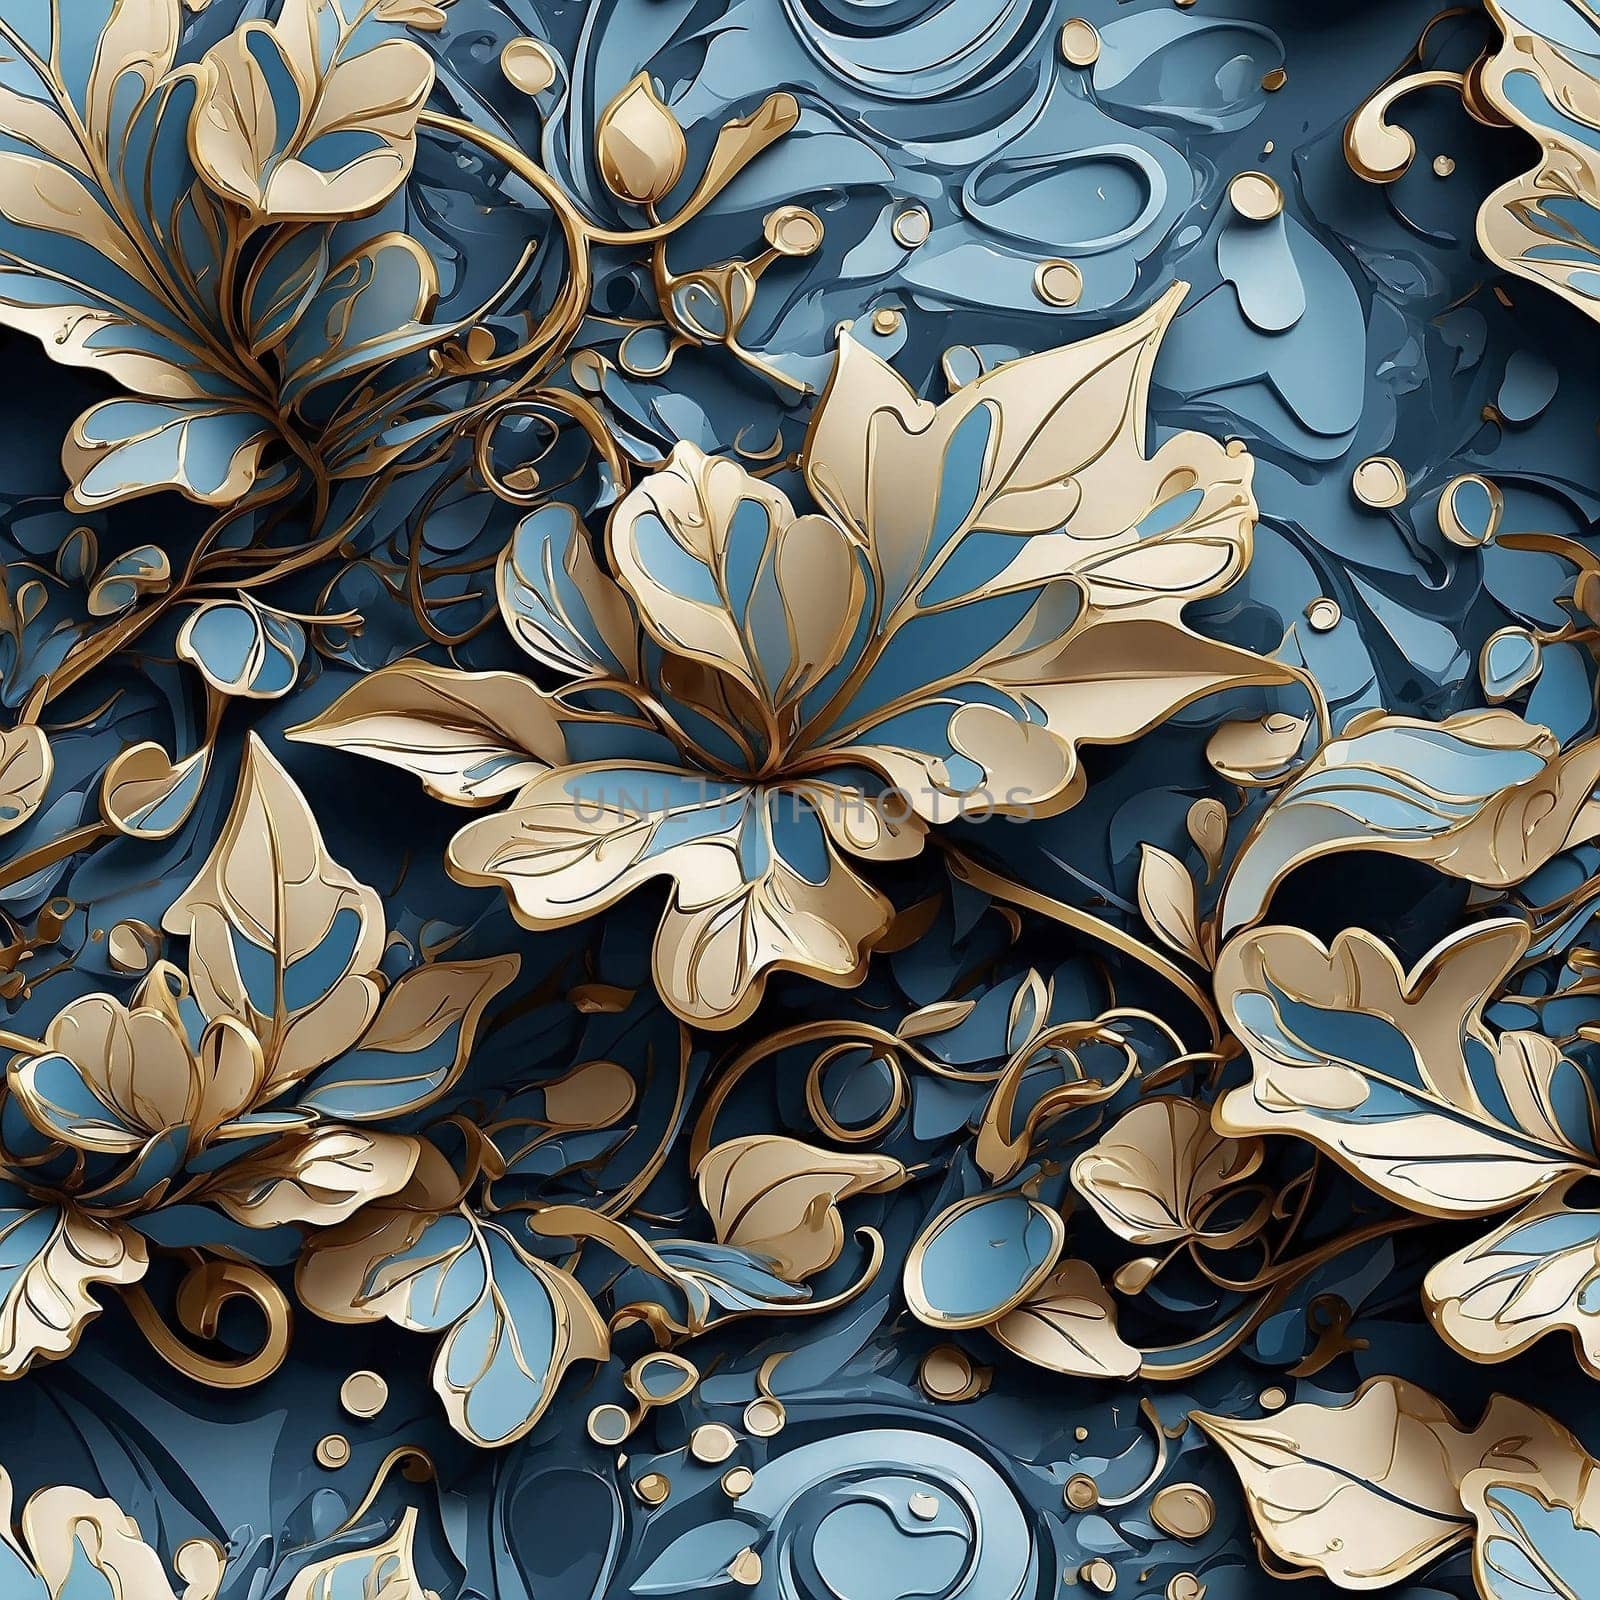 A detailed view of a seamless blue and gold wallpaper pattern, suitable for use as a background in graphic designs.